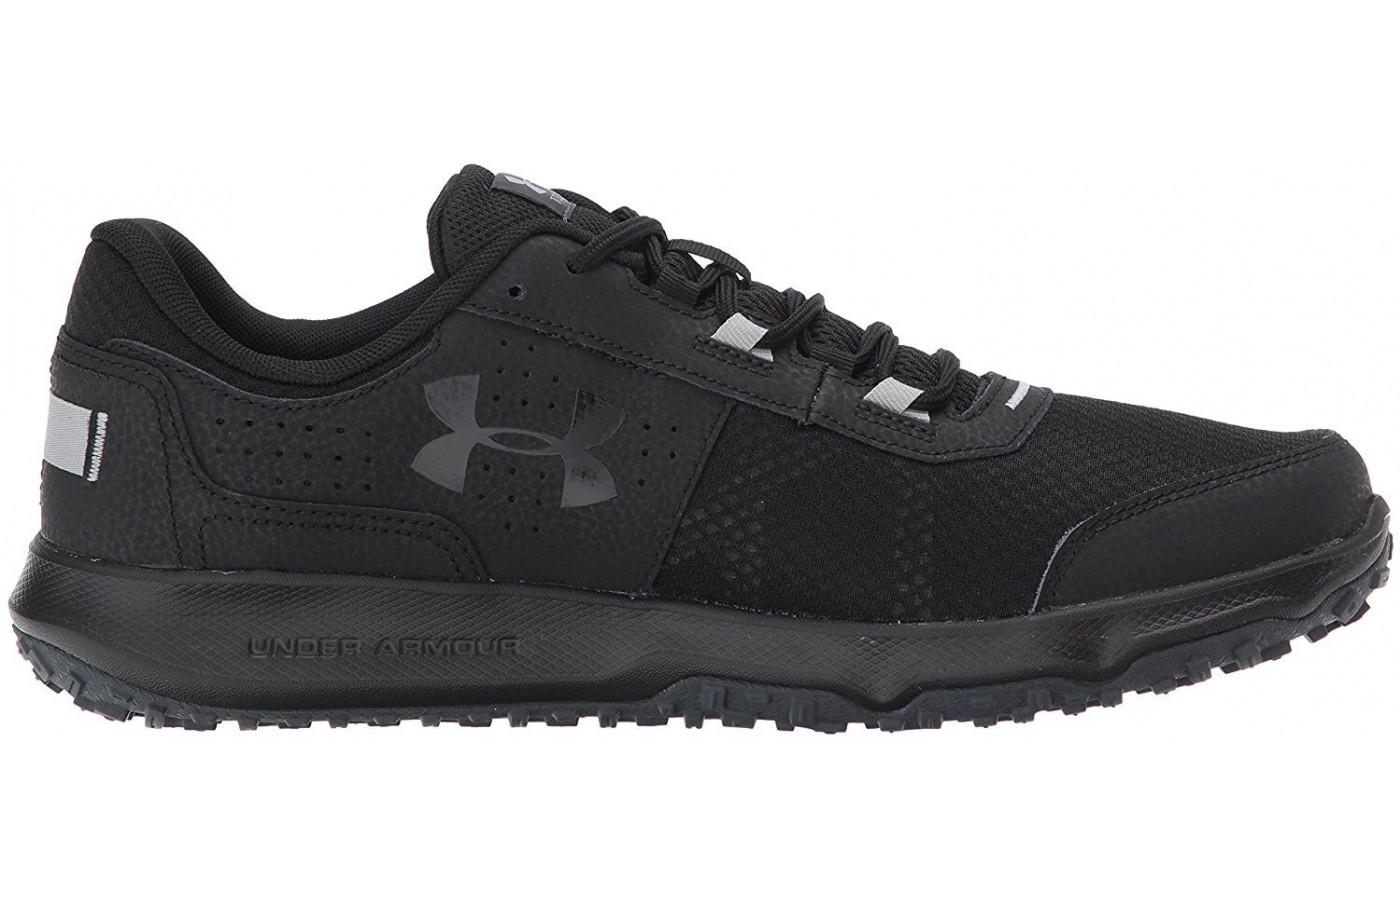 EVA foam in the Under Armour Toccoa's midsole provides dense cushioning.